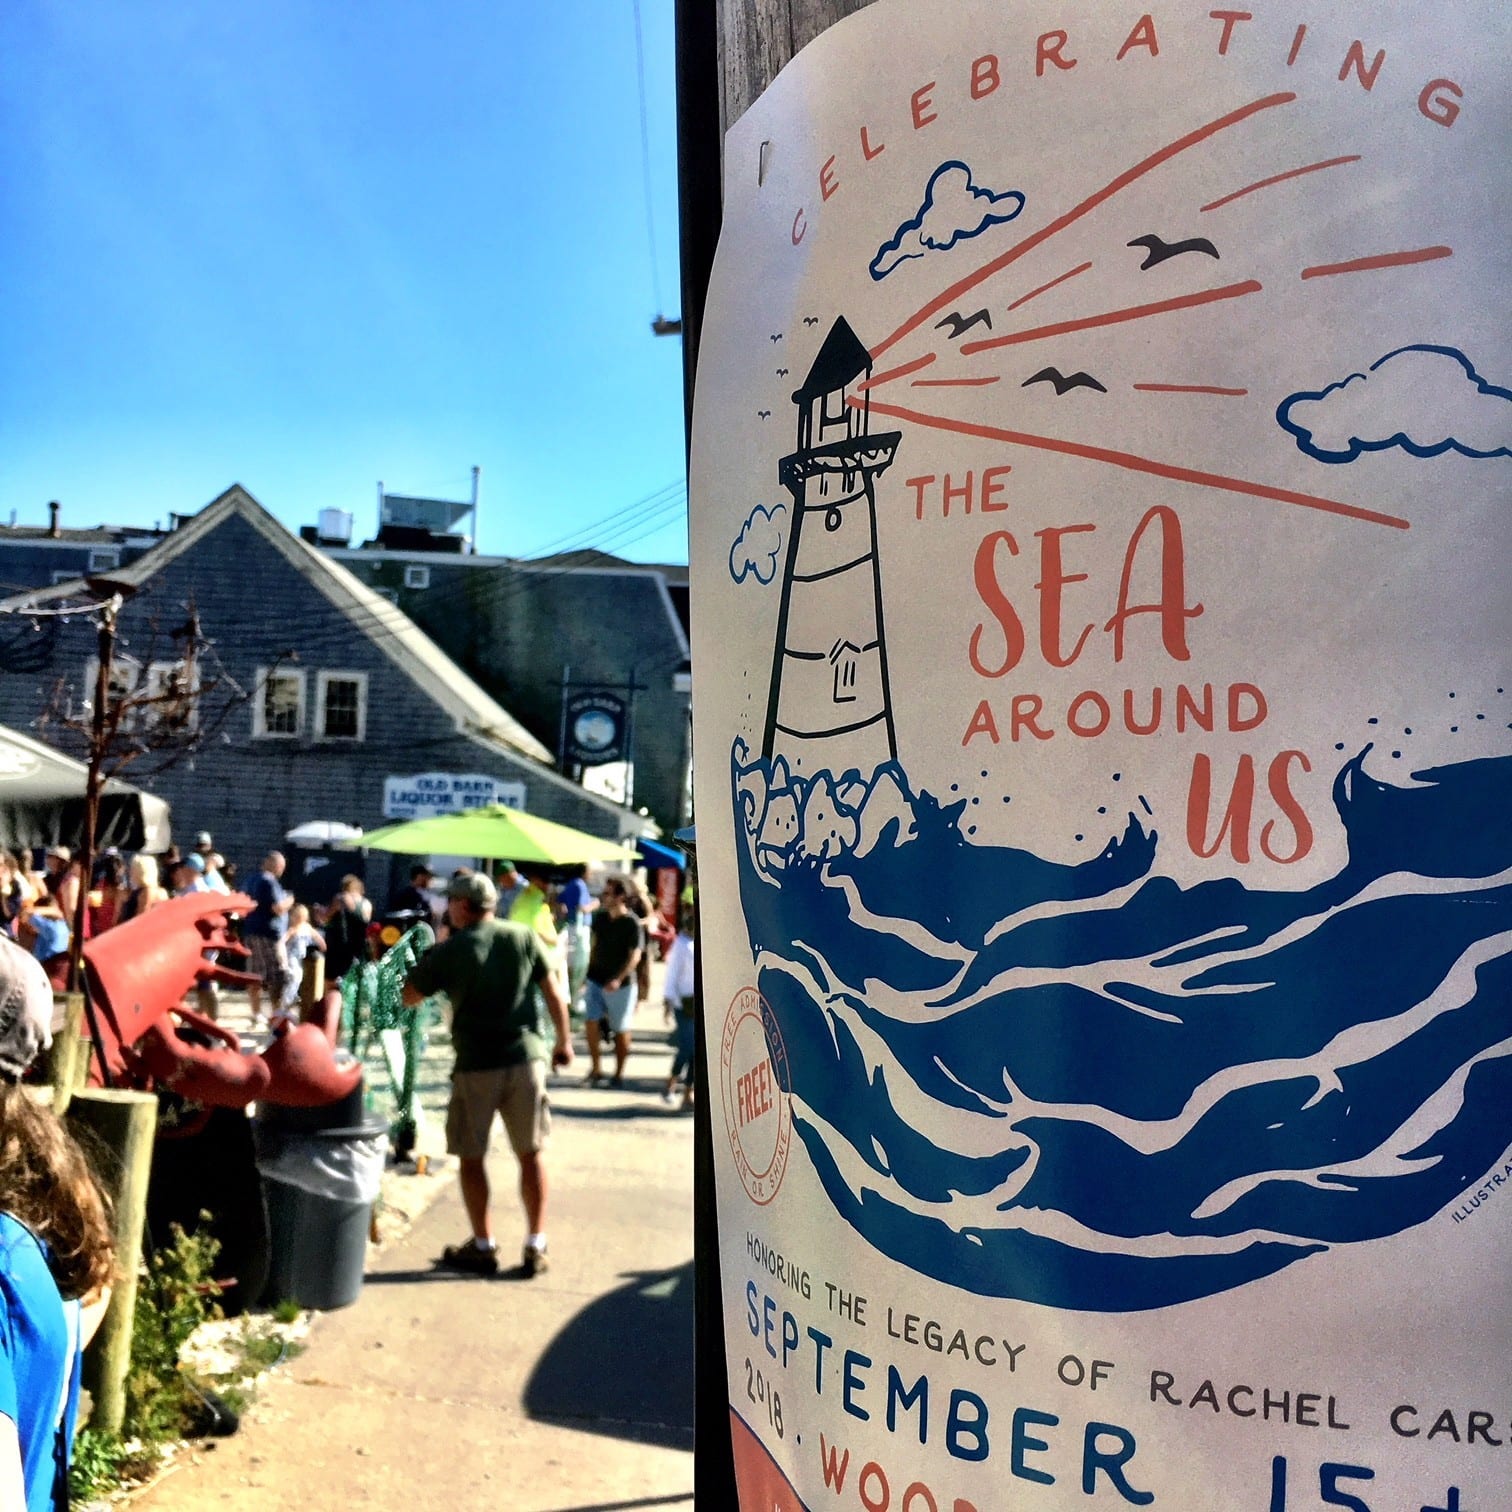 Sea Around Us Weekend celebrating the legacy of Rachel Carson in Woods Hole